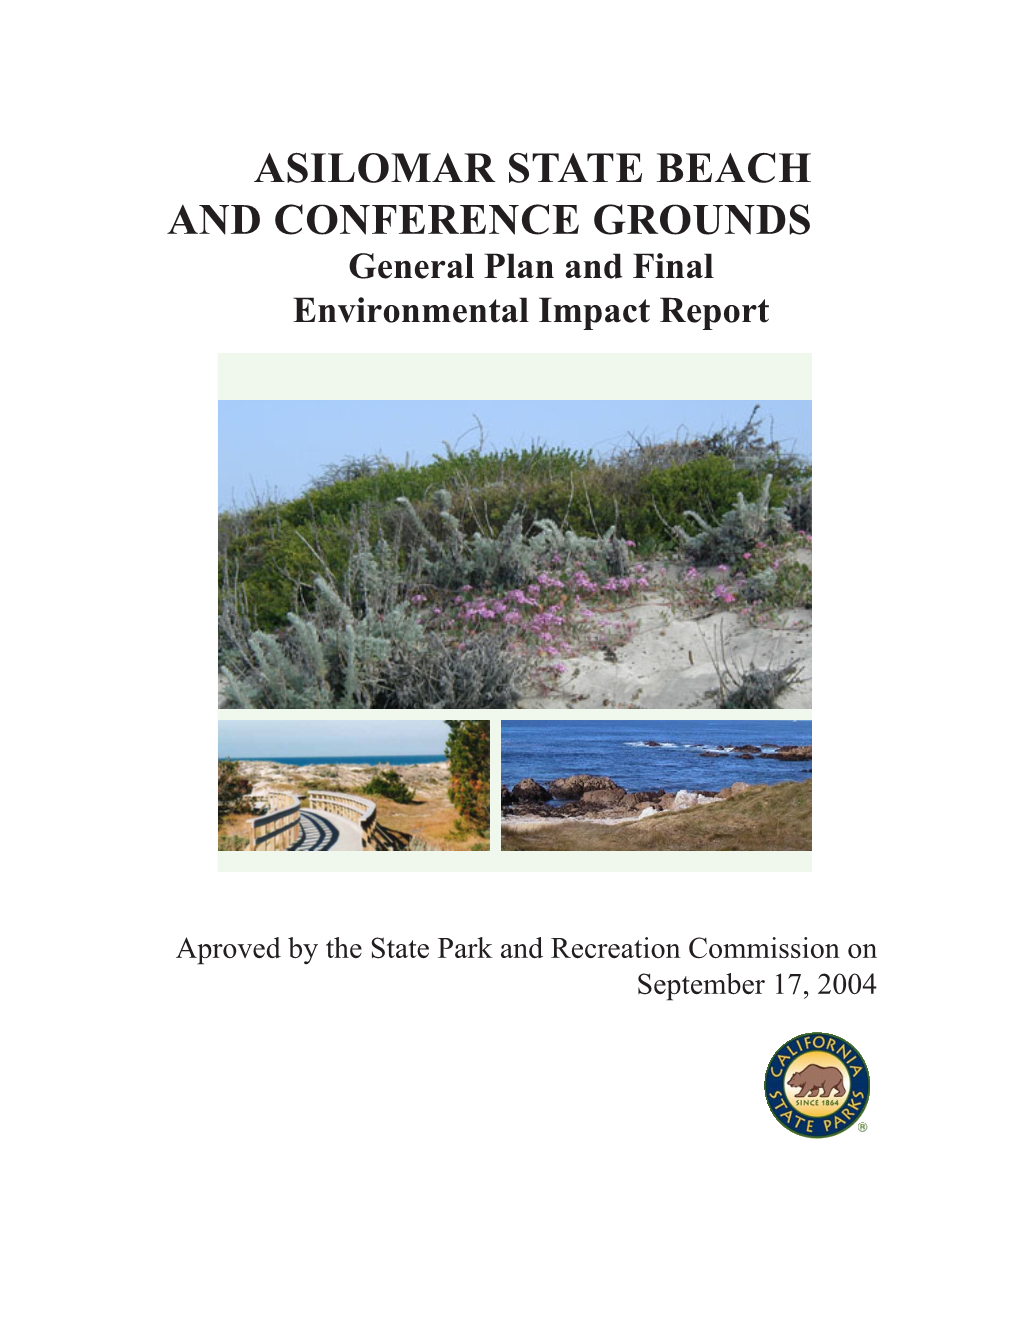 ASILOMAR STATE BEACH and CONFERENCE GROUNDS General Plan and Final Environmental Impact Report